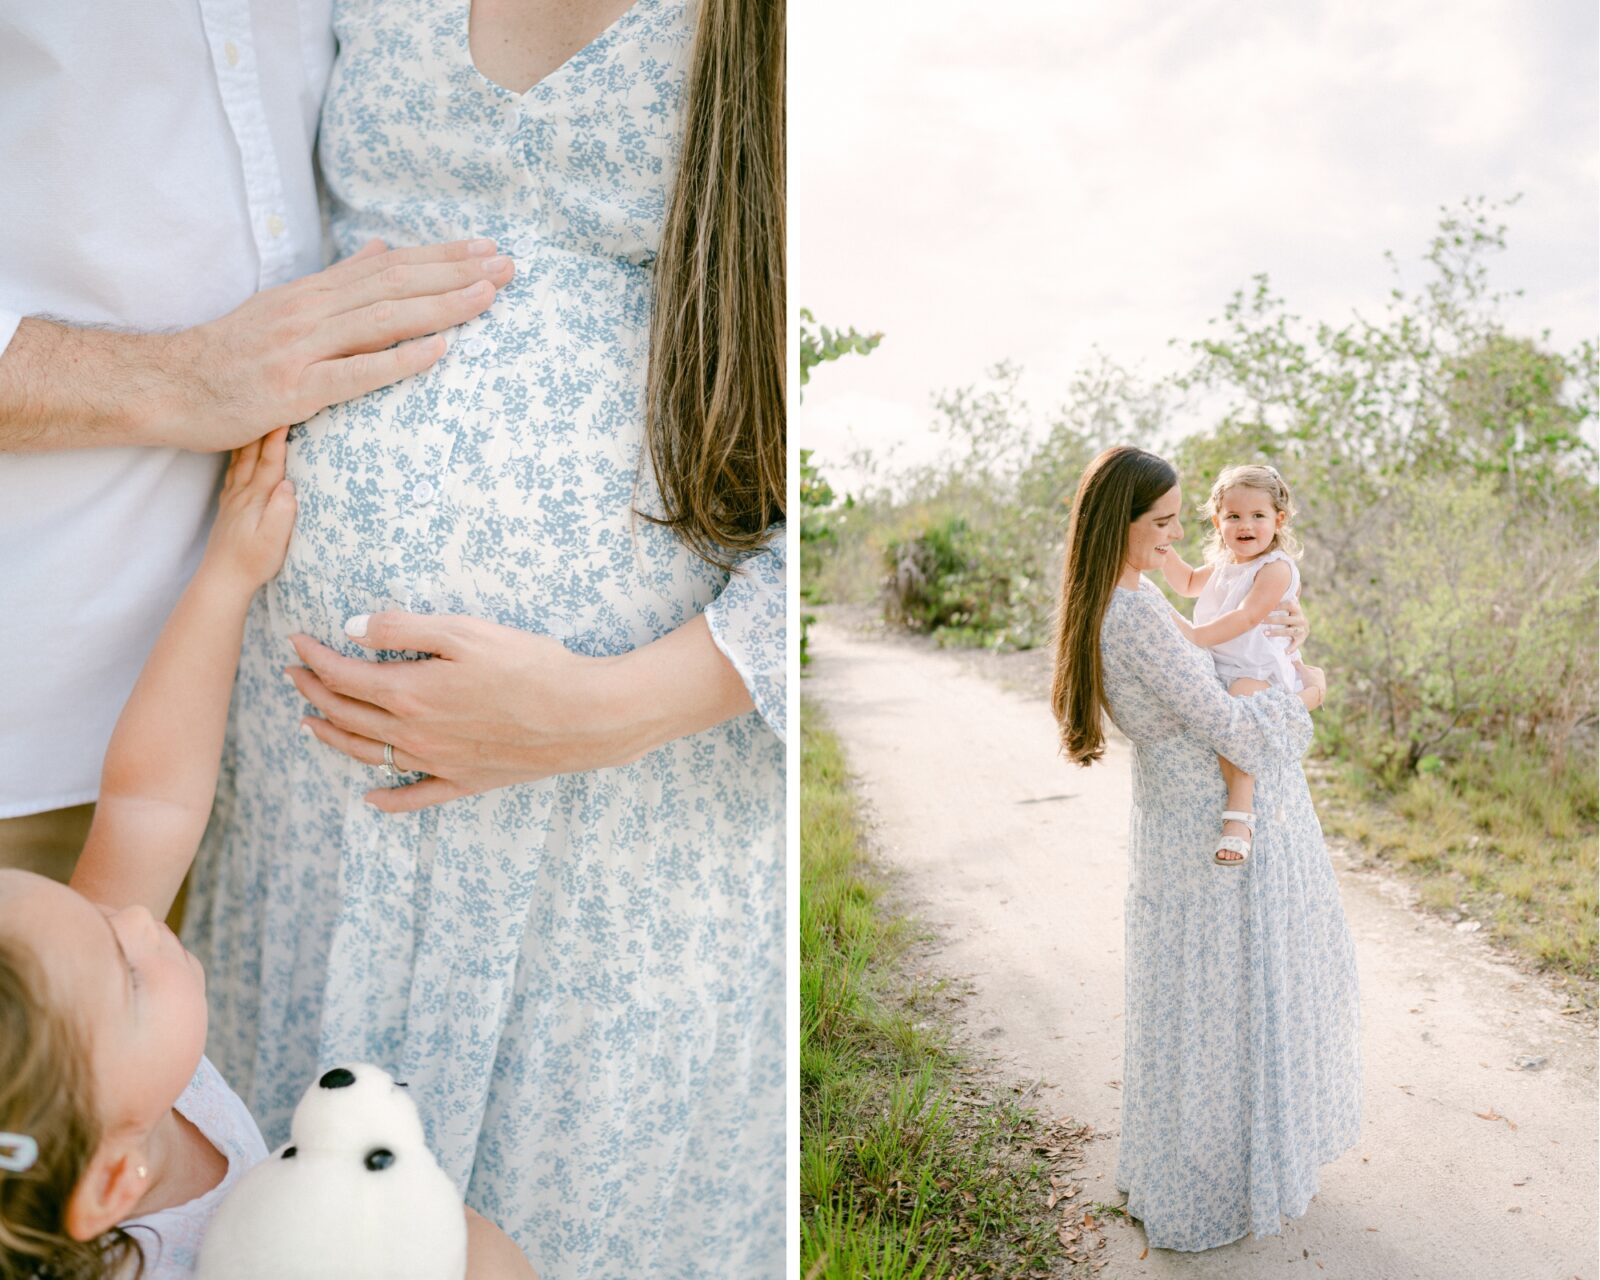 5 tips for successful maternity photos with a toddler